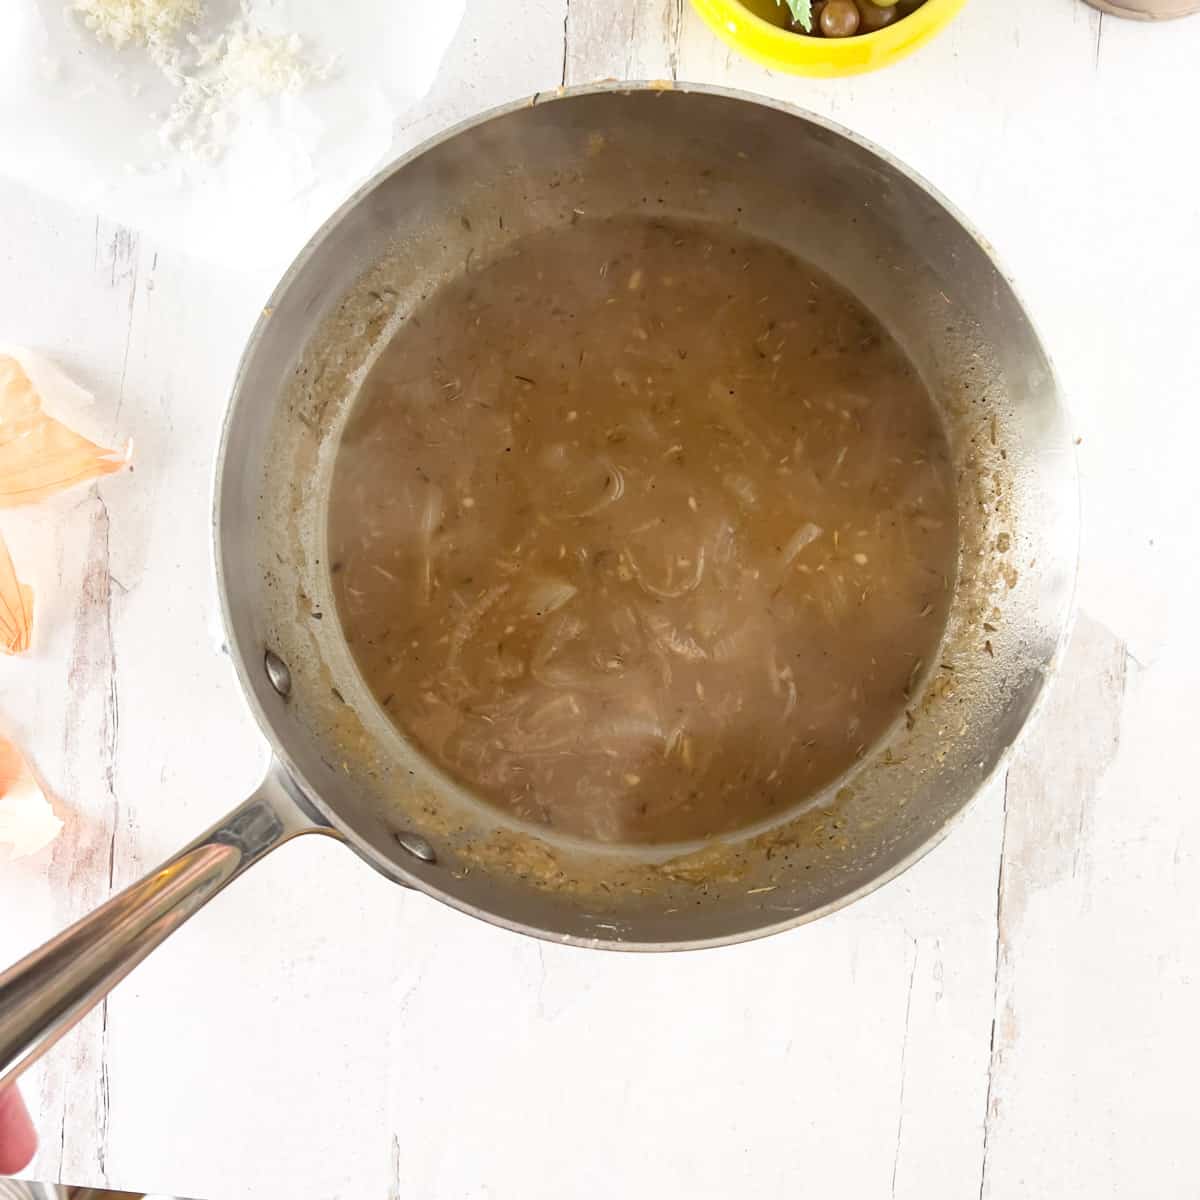 Onions and broth cooking in a stainless steel saucepan.